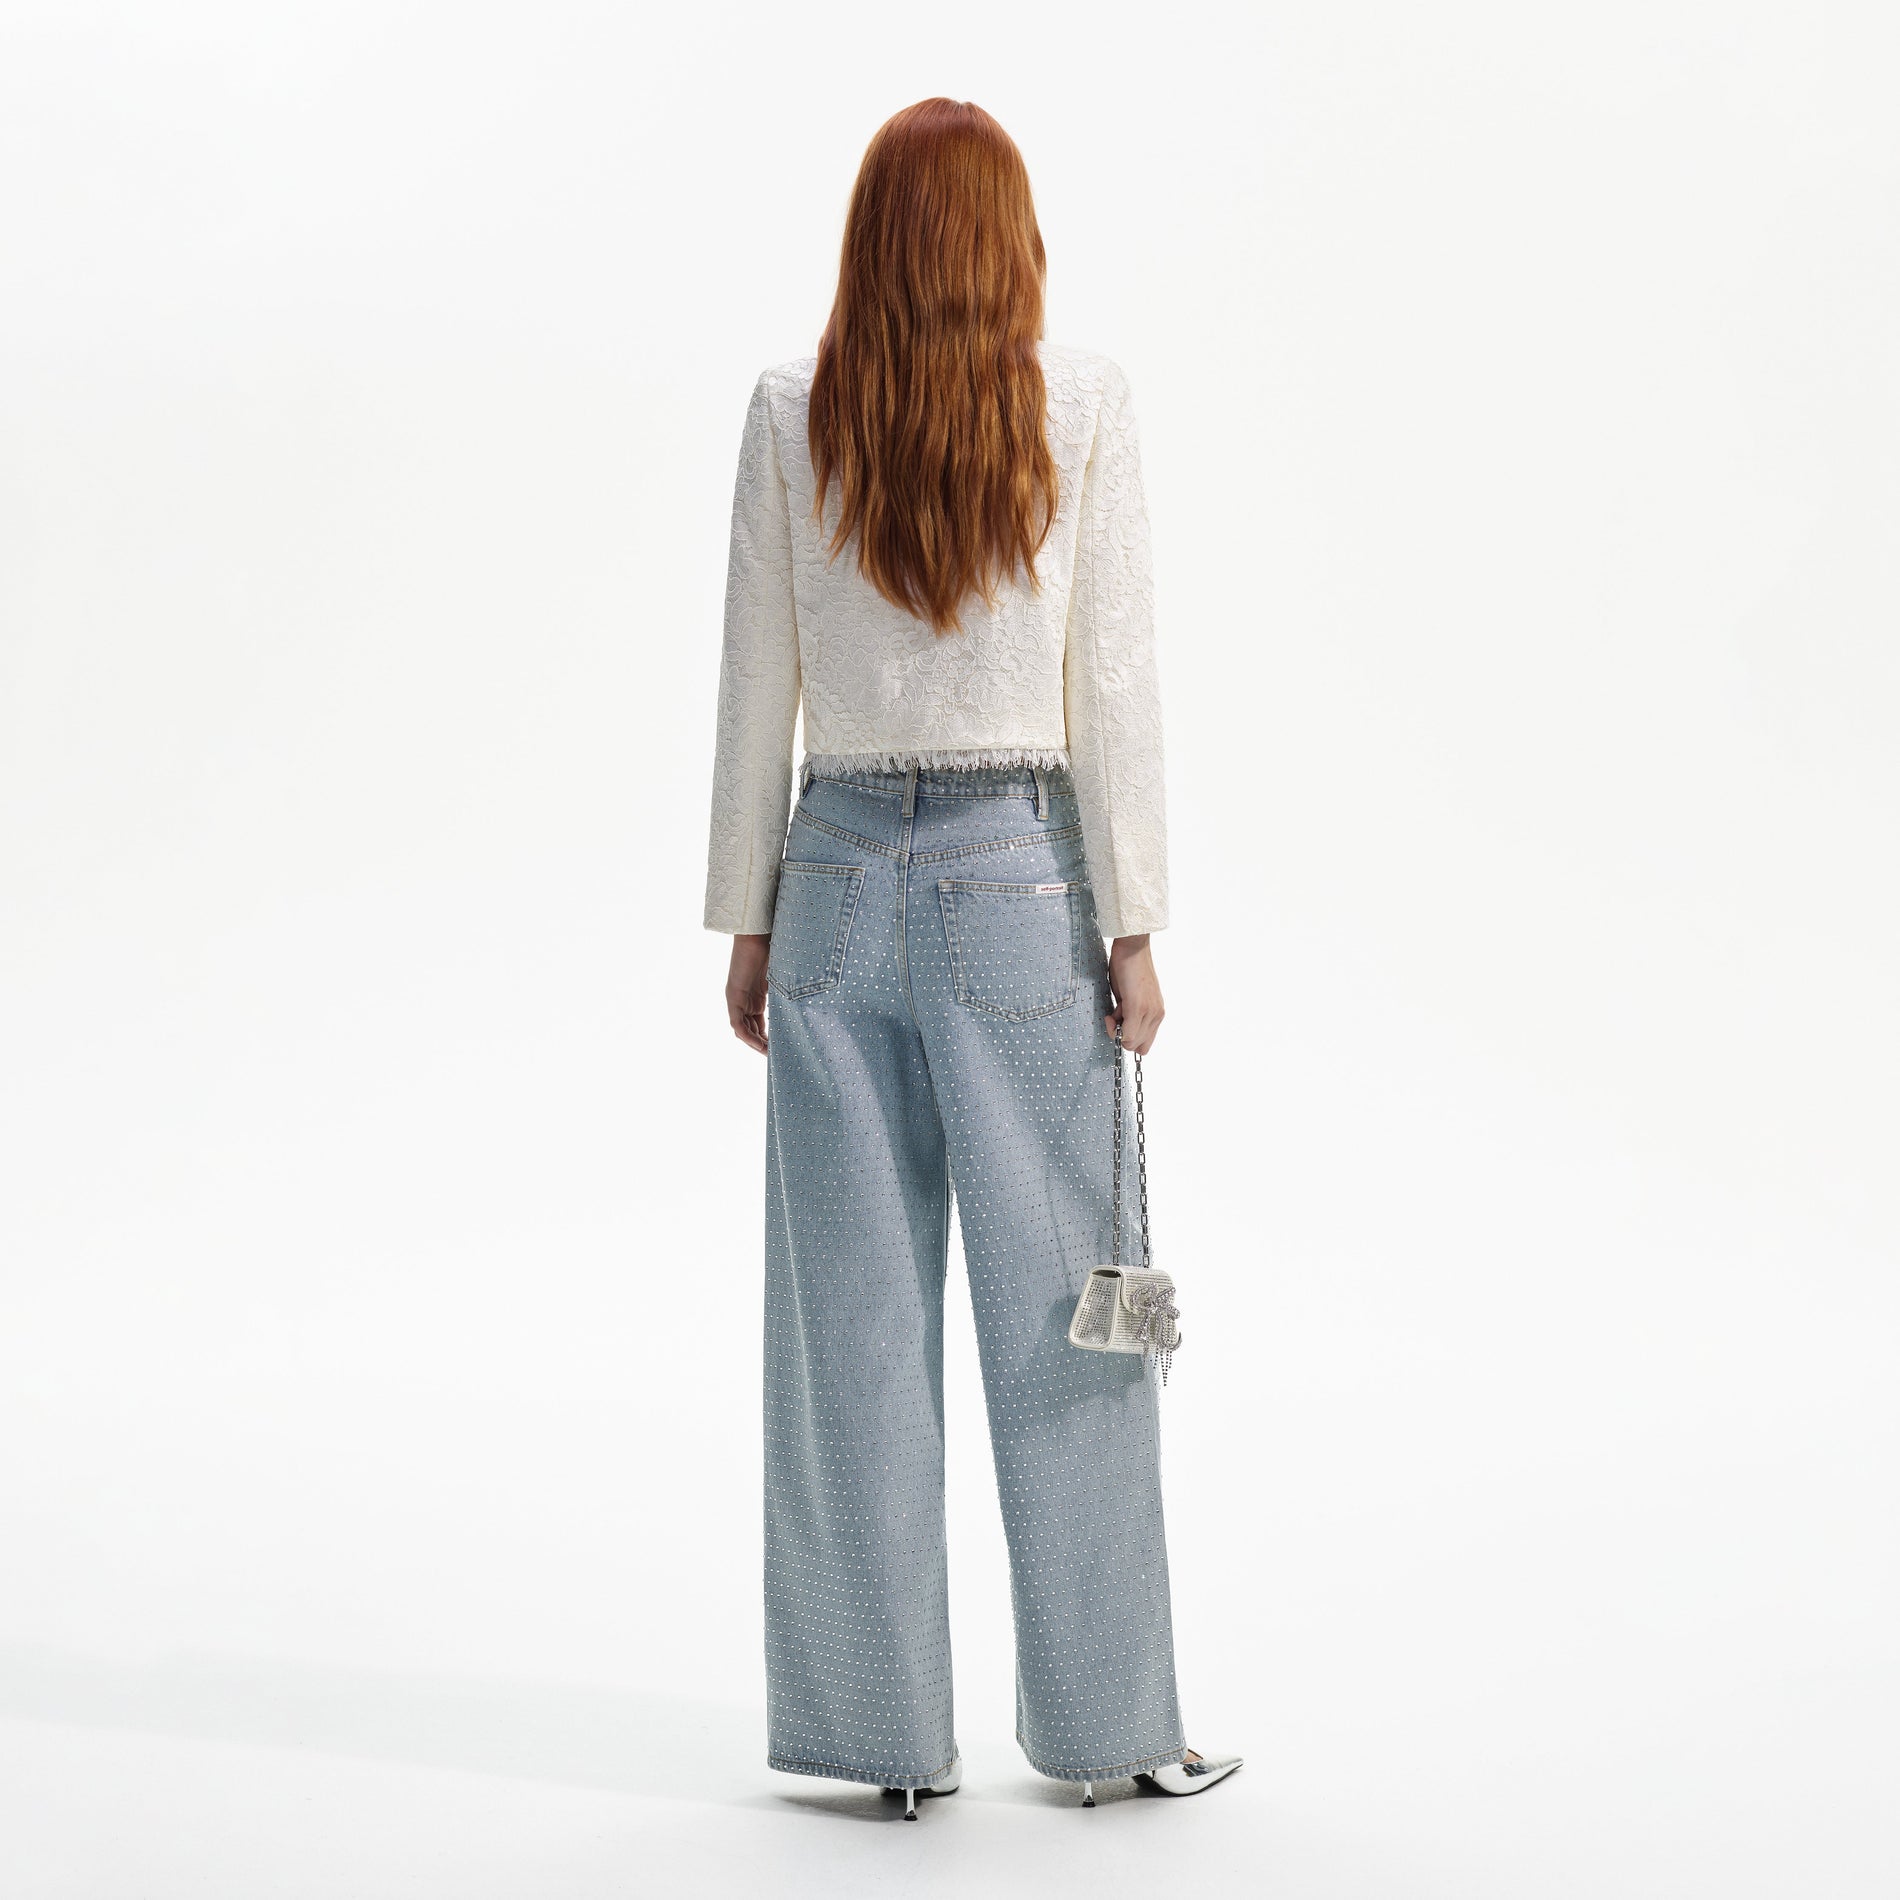 White Cord Lace Trousers